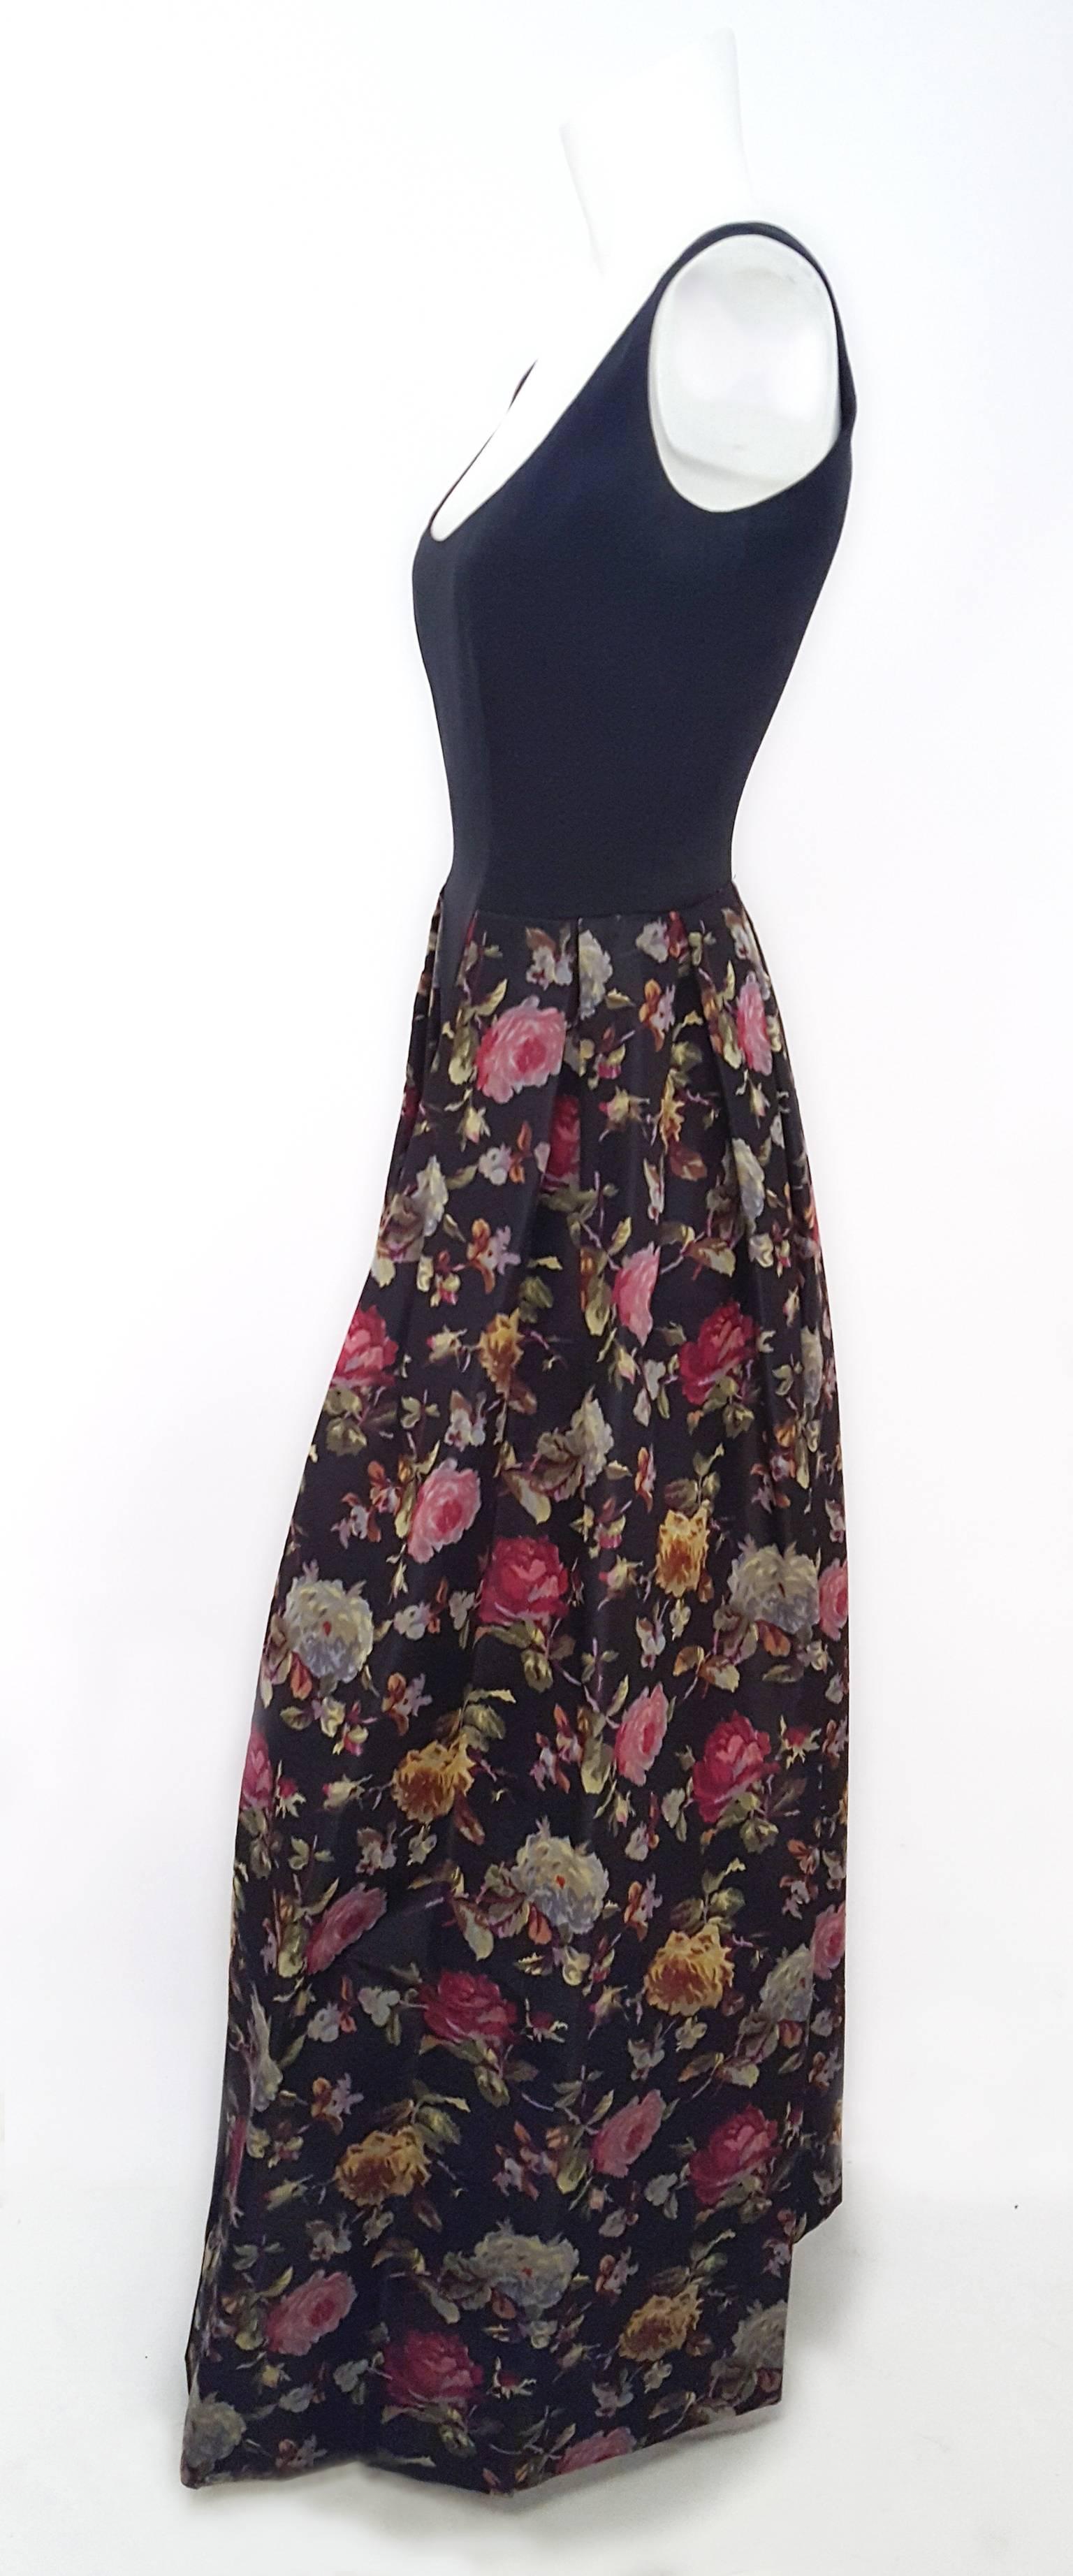 80s Black Abstract Floral Dress. Bodice is a jersey fabric, lined in silk satin. Peplum is printed taffeta lined in organza. Back zip closure.